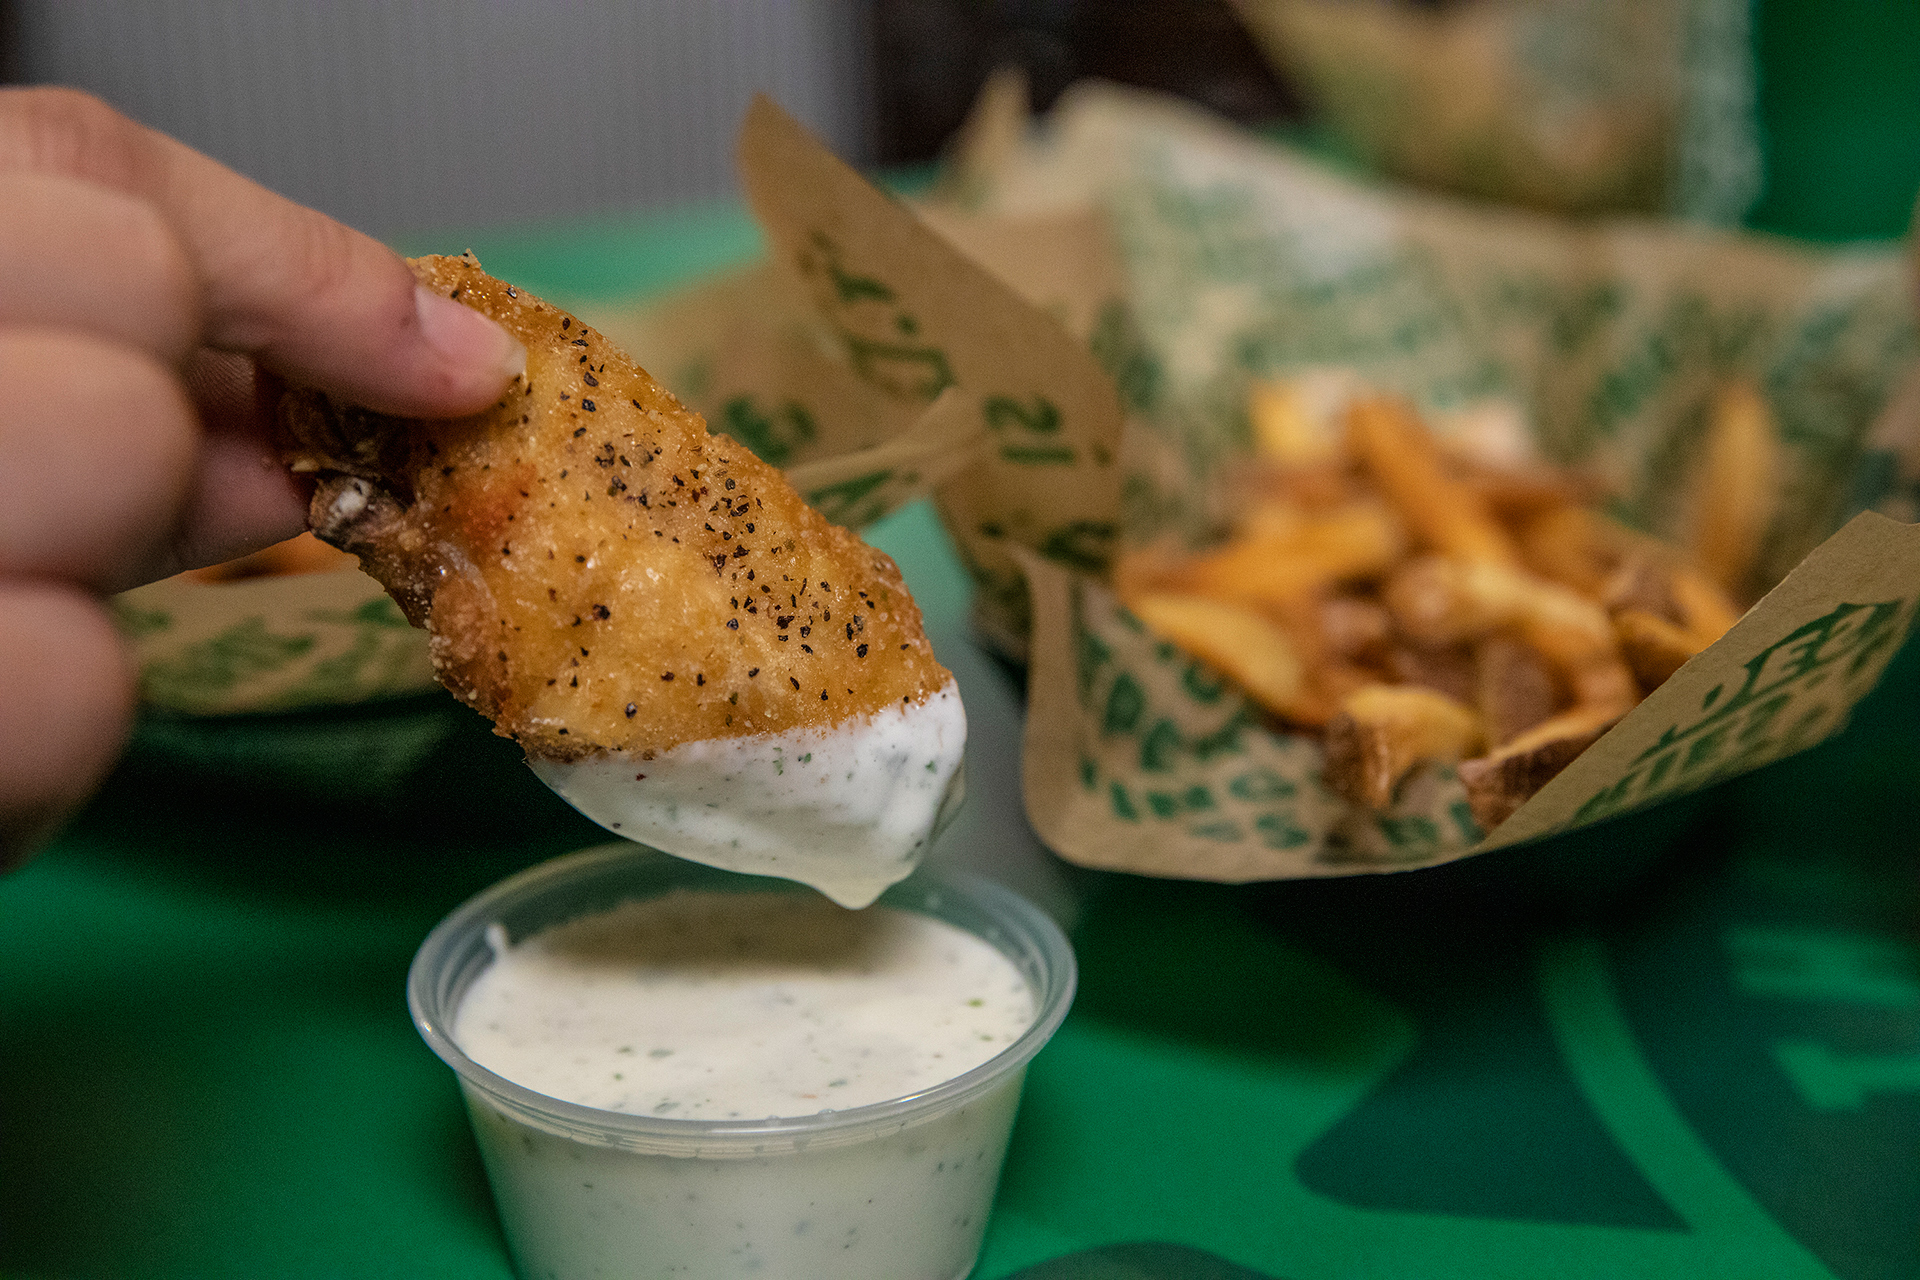 Wingstop Worker Shows How Its Ranch Dressing Is Made